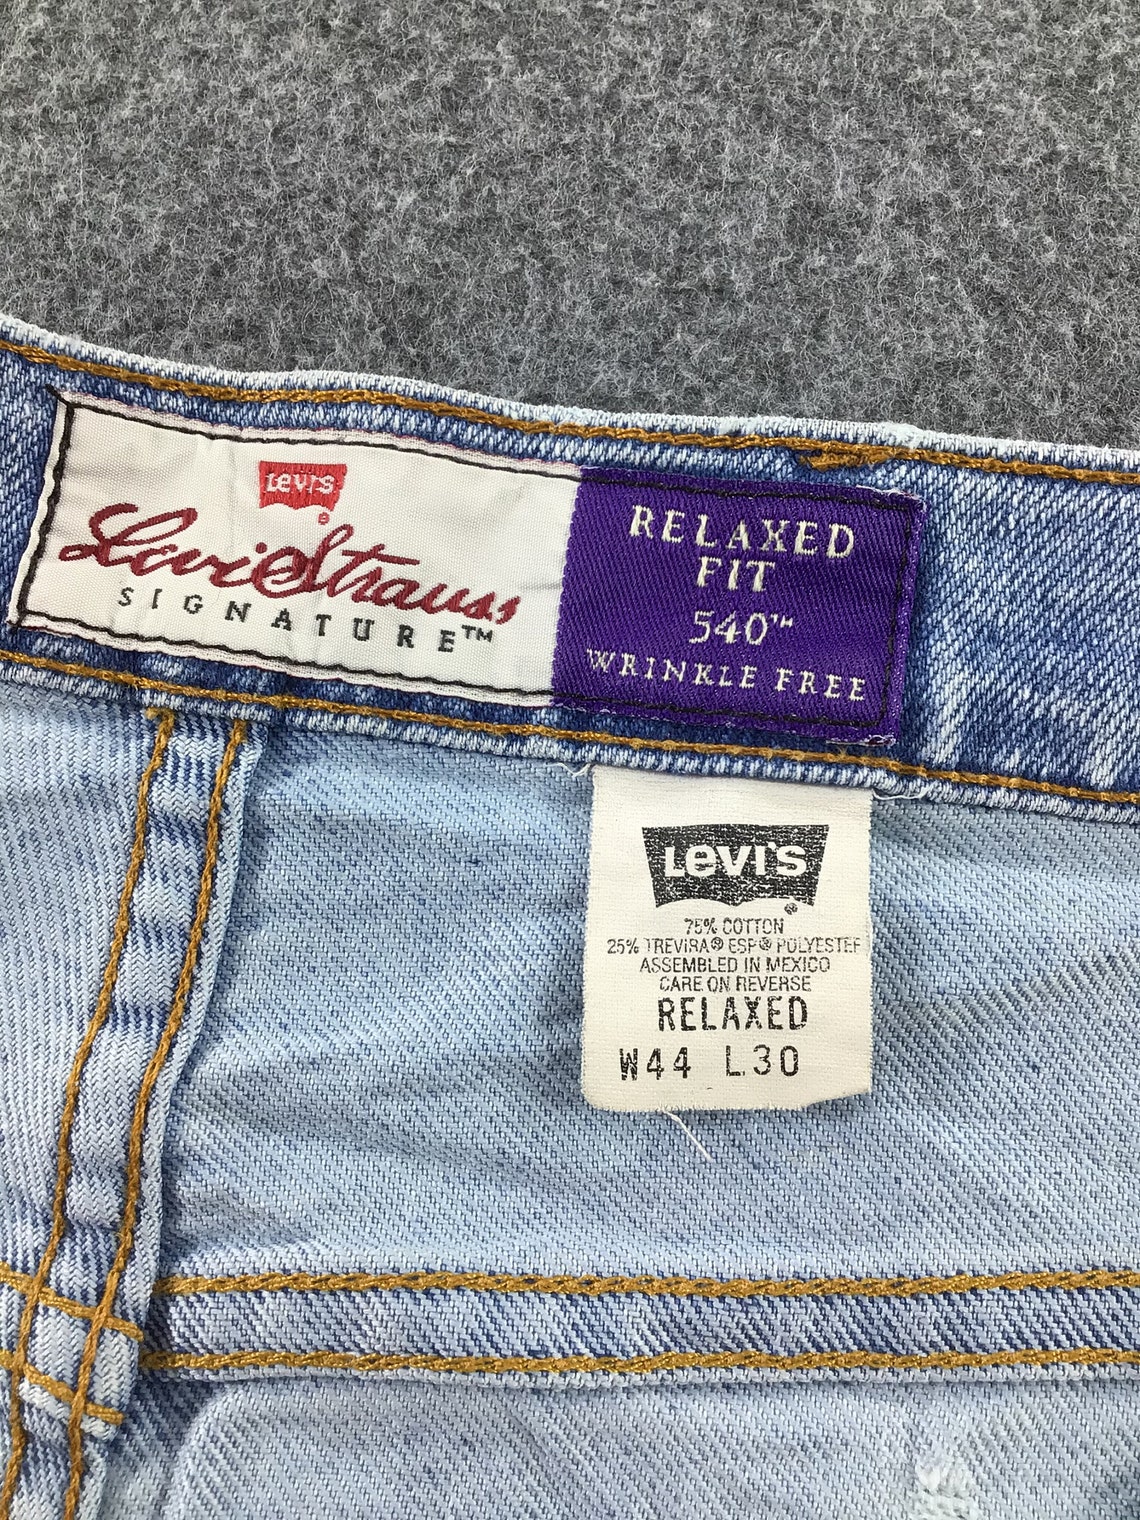 Vintage Levis 540 Jeans 44x28 Red Tab Faded Denim Grunge Style | Etsy